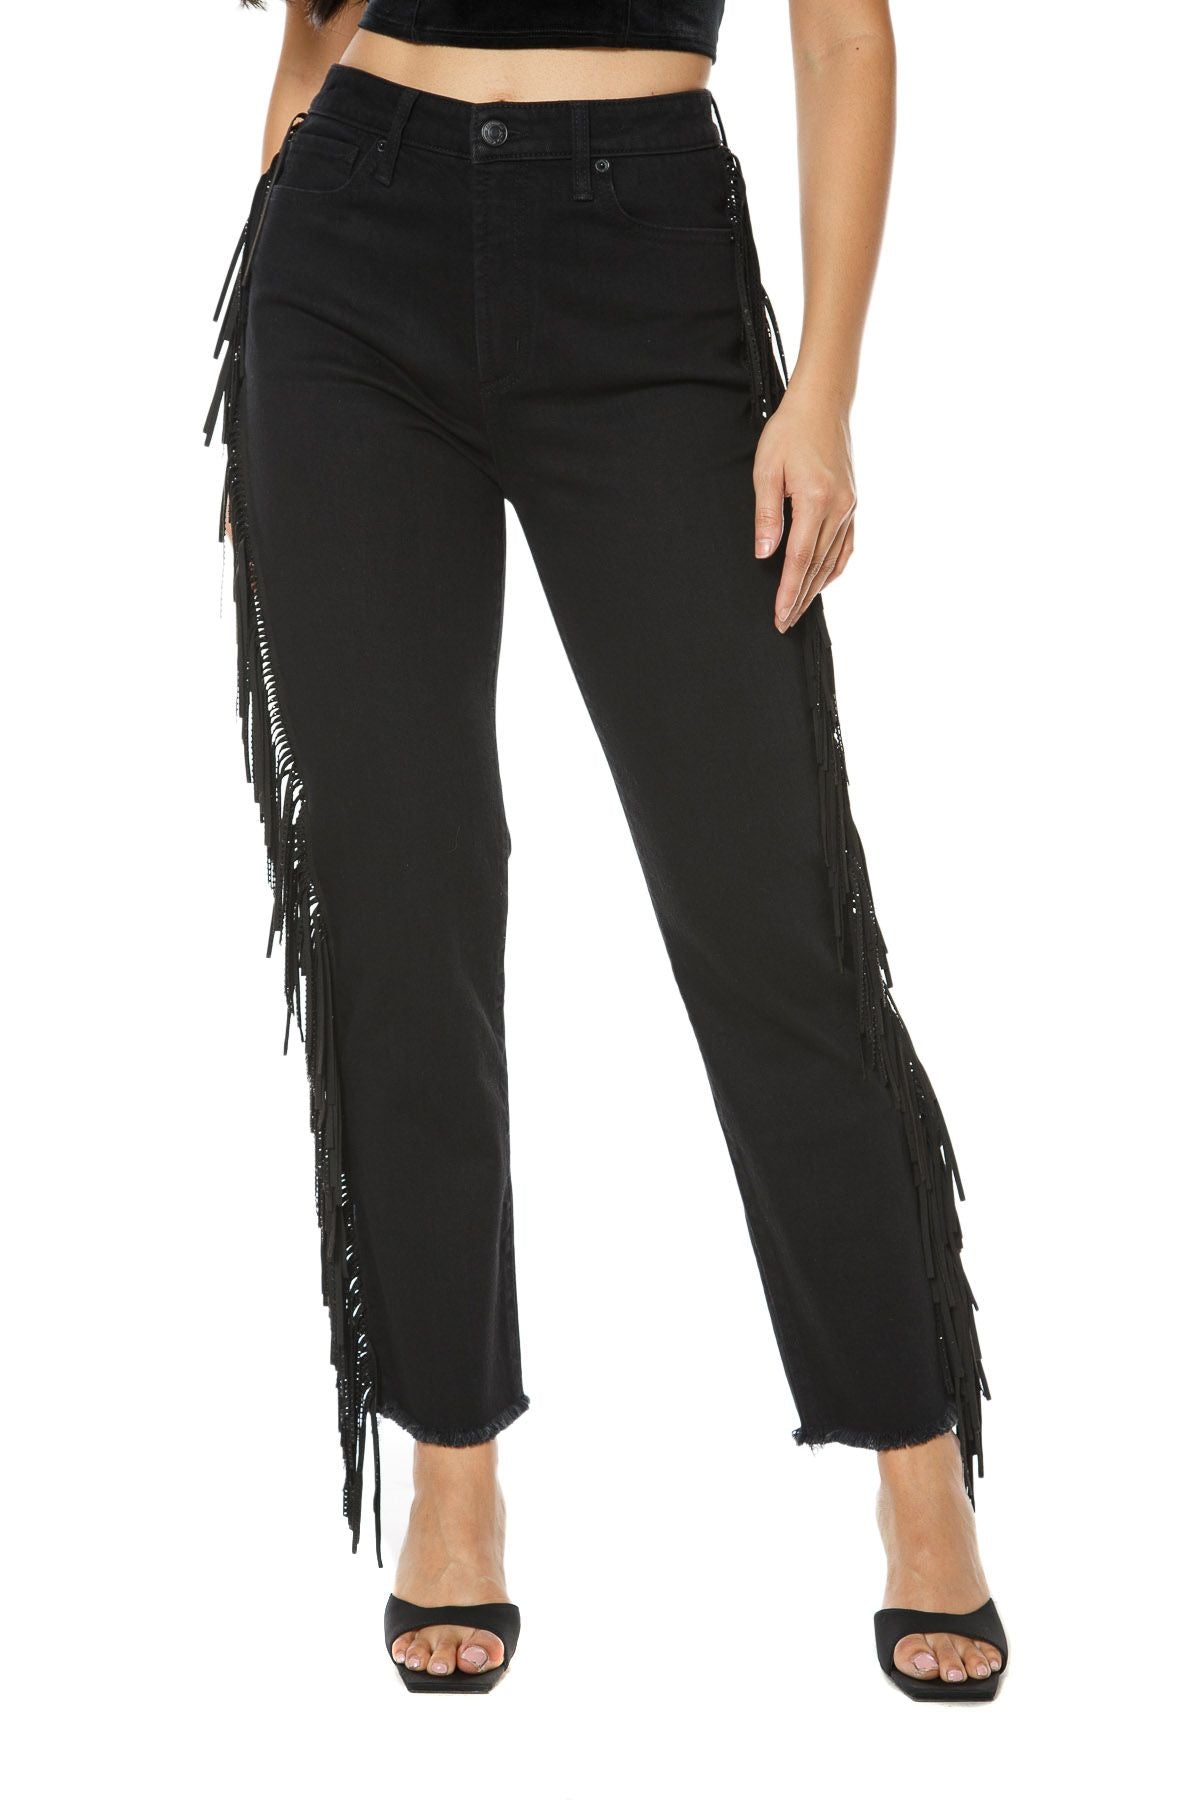 Juicy Couture Venice Straight Leg Jeans with Fringe Black Wash